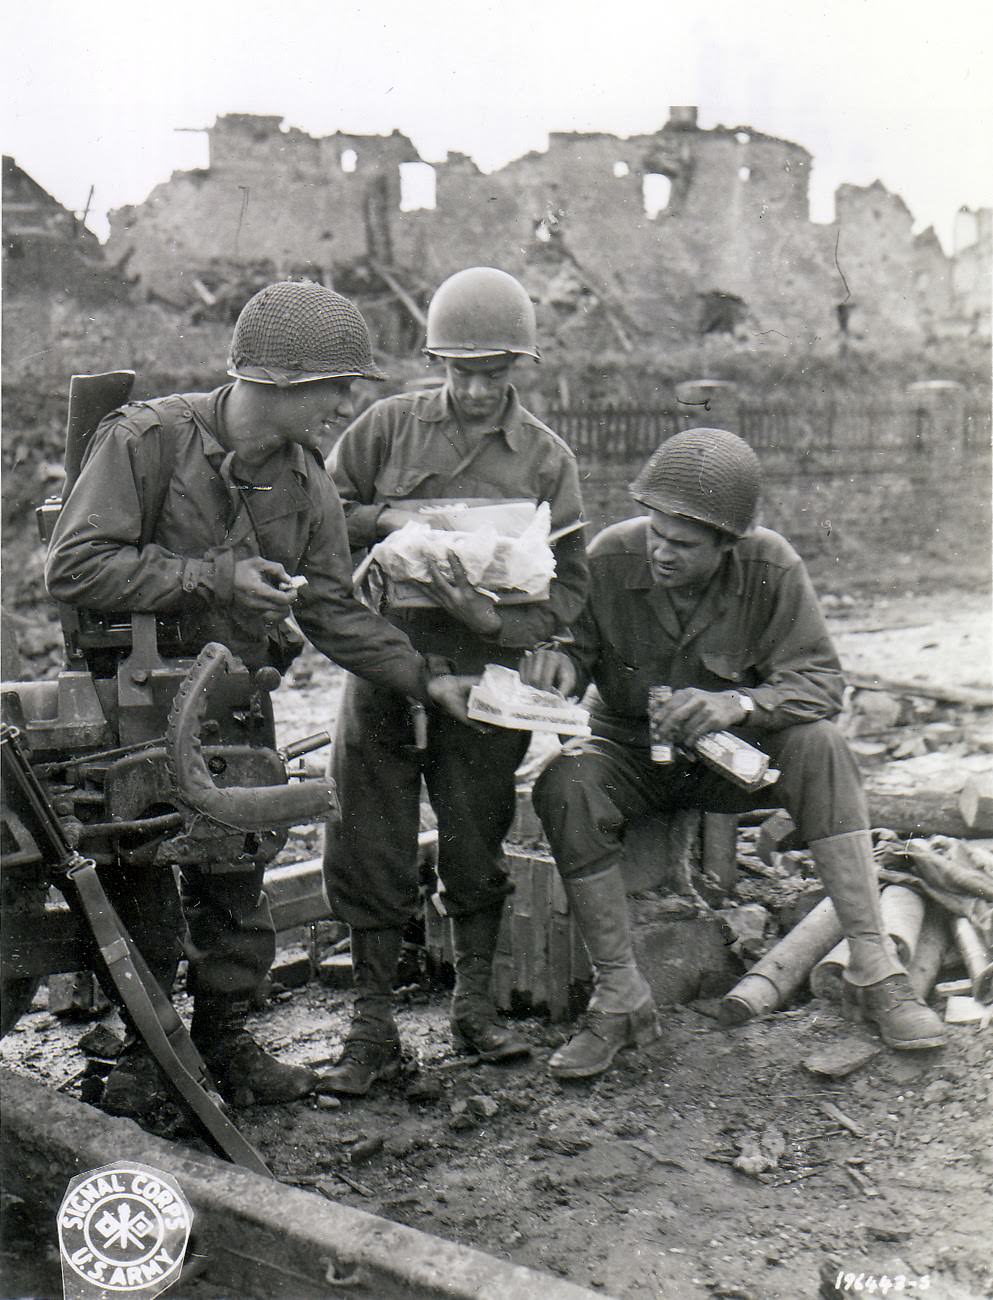 S Army Pfc. Carl Anker, Pfc. Edmund Dill, and Sgt. Ted Bailey sharing the contents of the care package sent by Dill's wife for the Christmas holiday, somewhere in Europe, 18 Nov 1944.